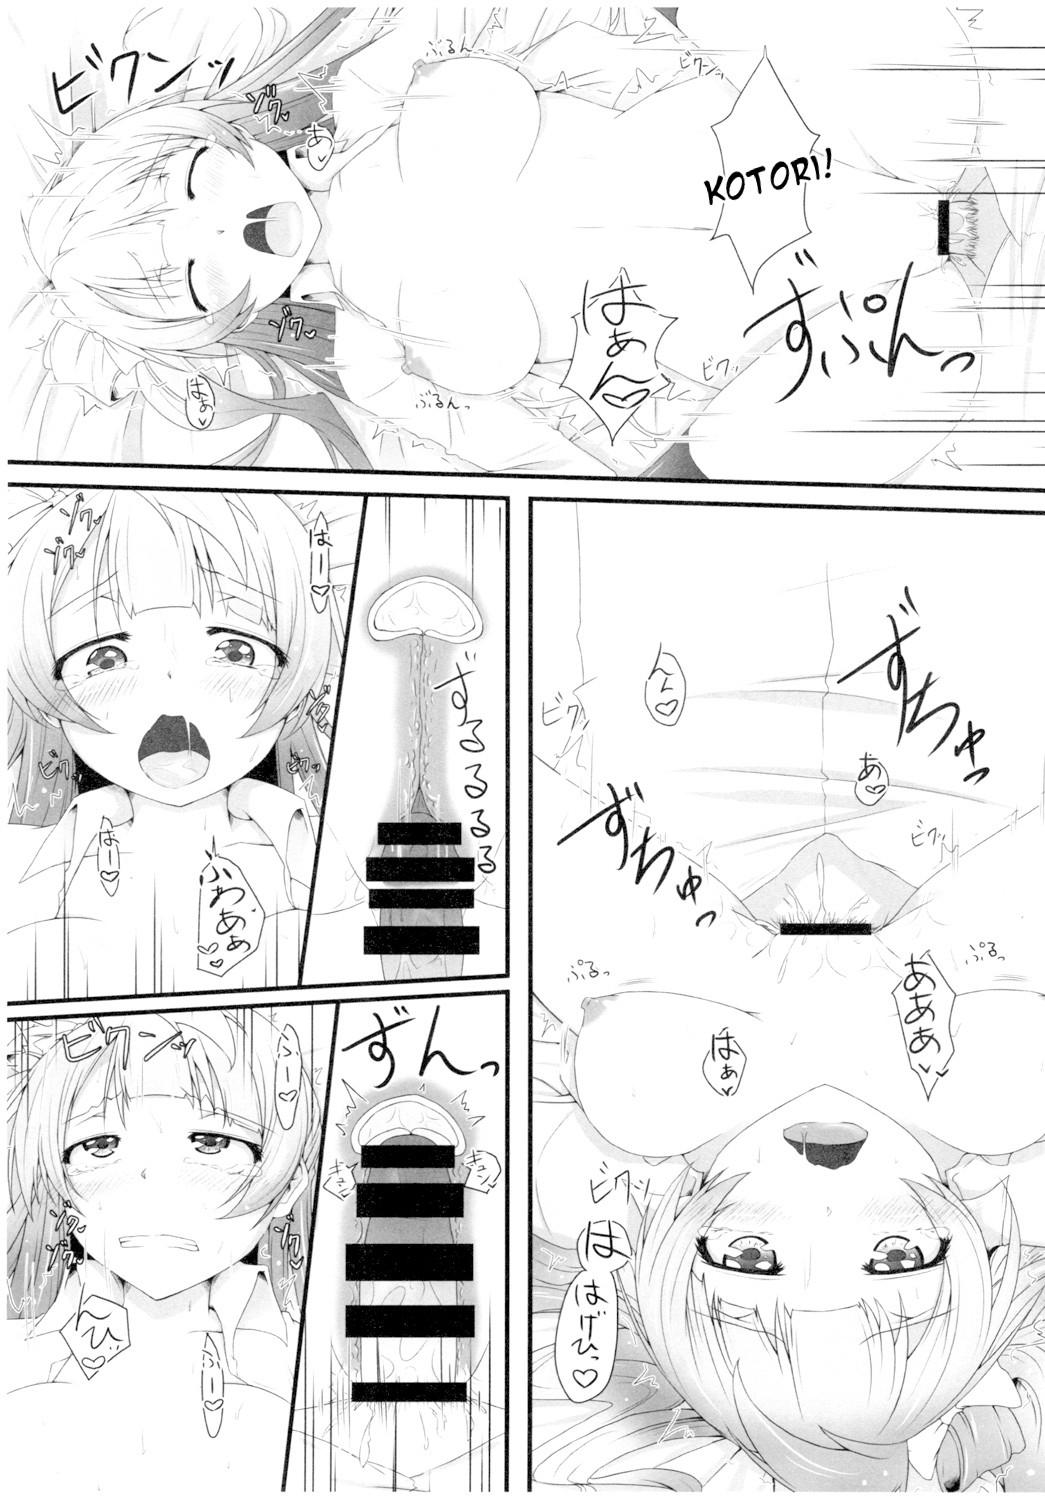 Leche Kotori-chan to! - Love live Hairypussy - Page 7